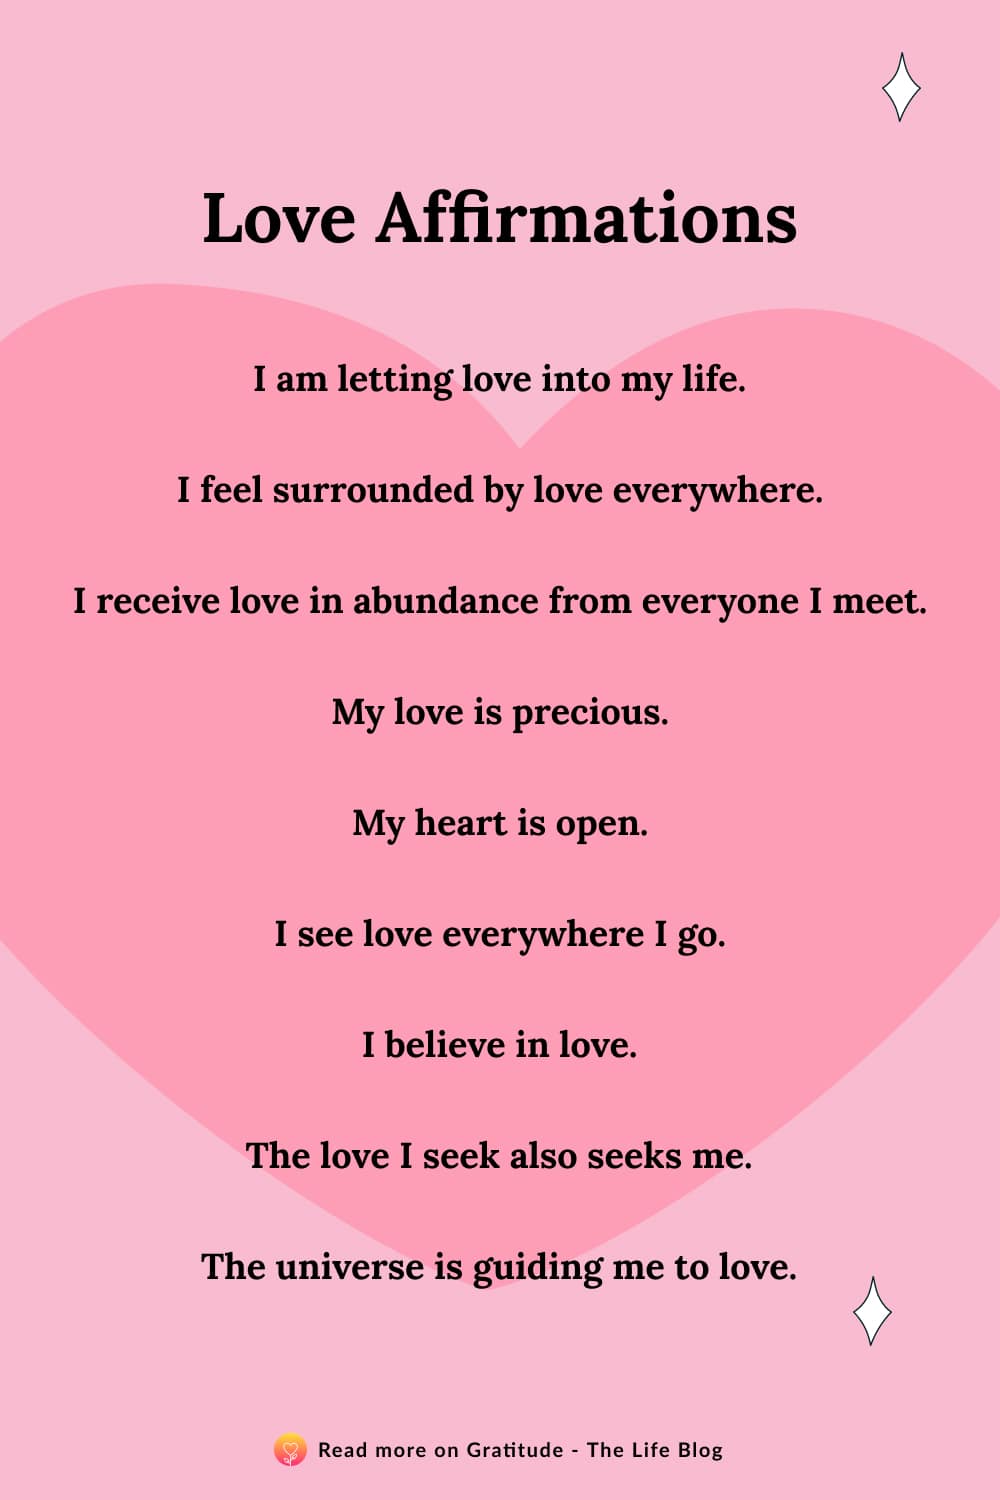 Image with list of love affirmations and relationship affirmations